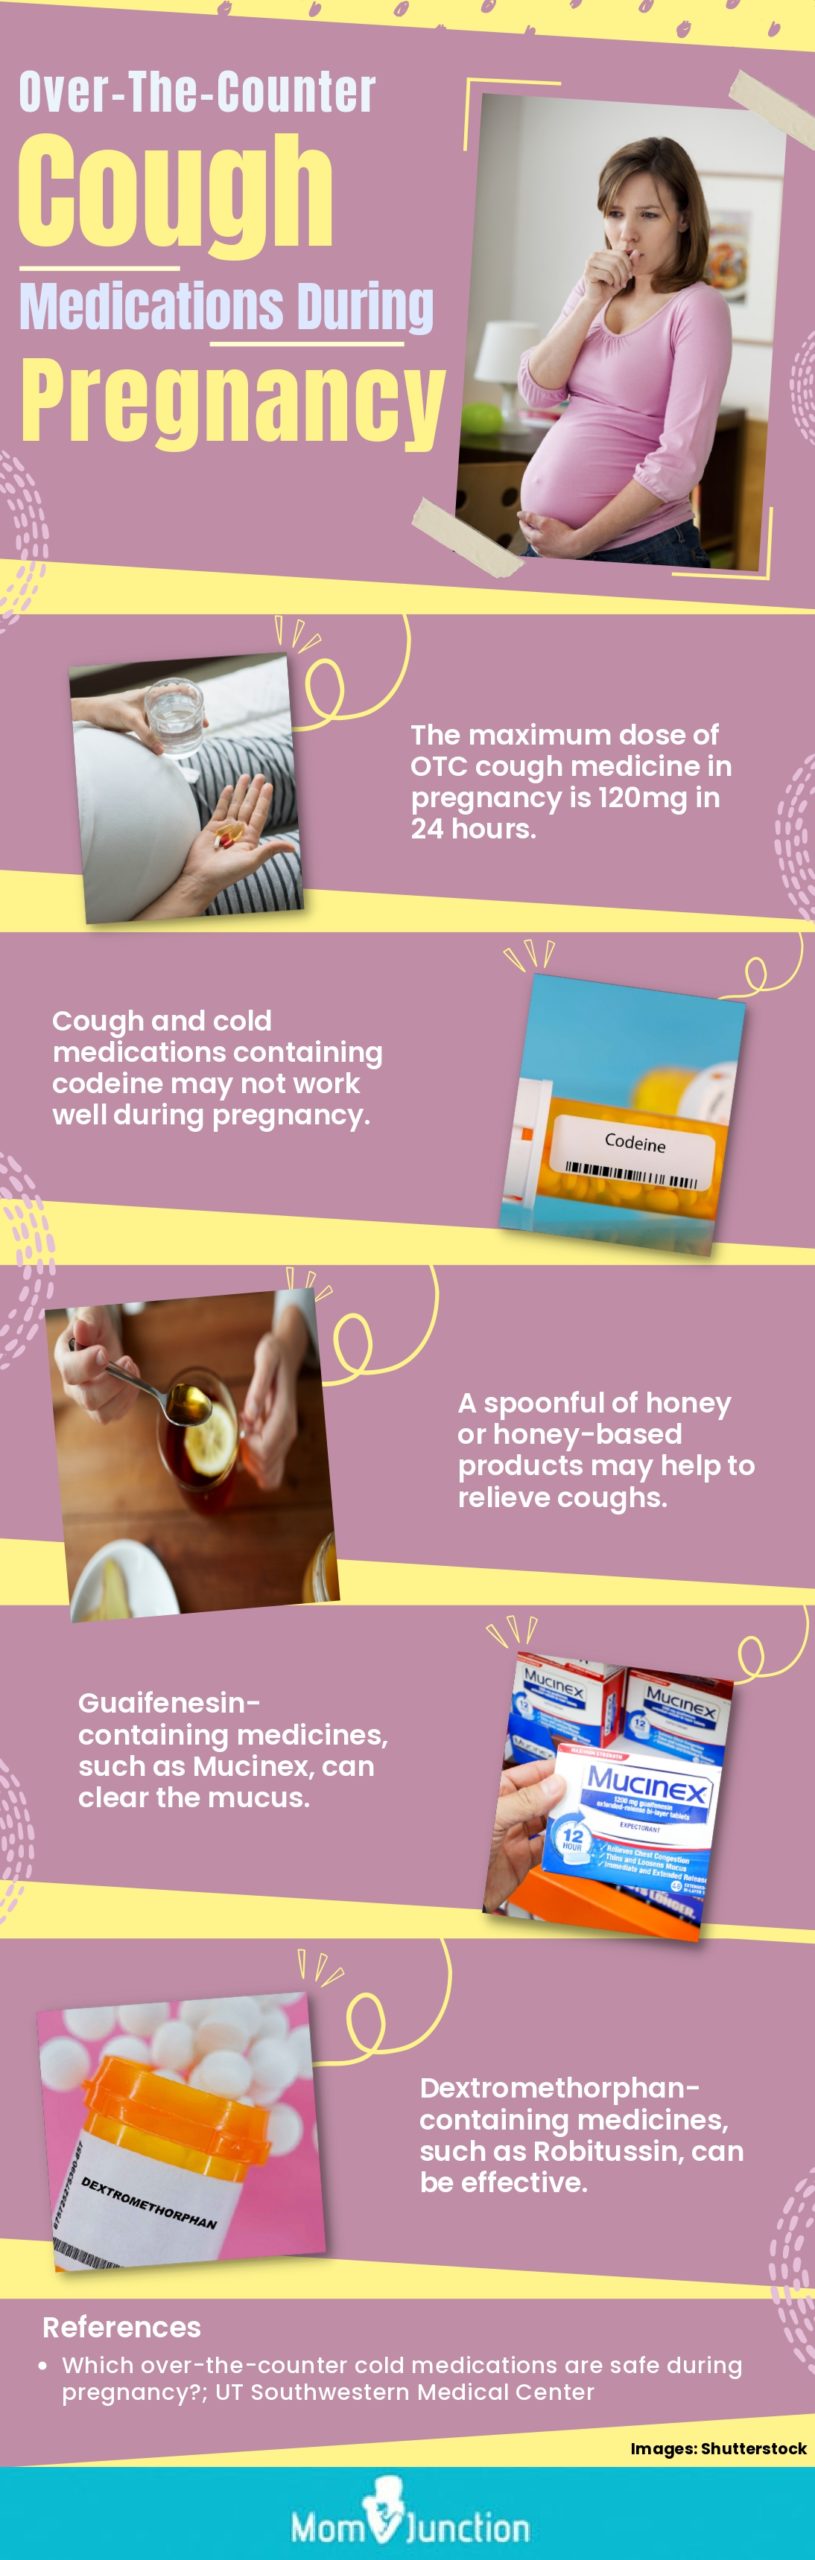 over the counter cough medications during pregnancy (infographic)